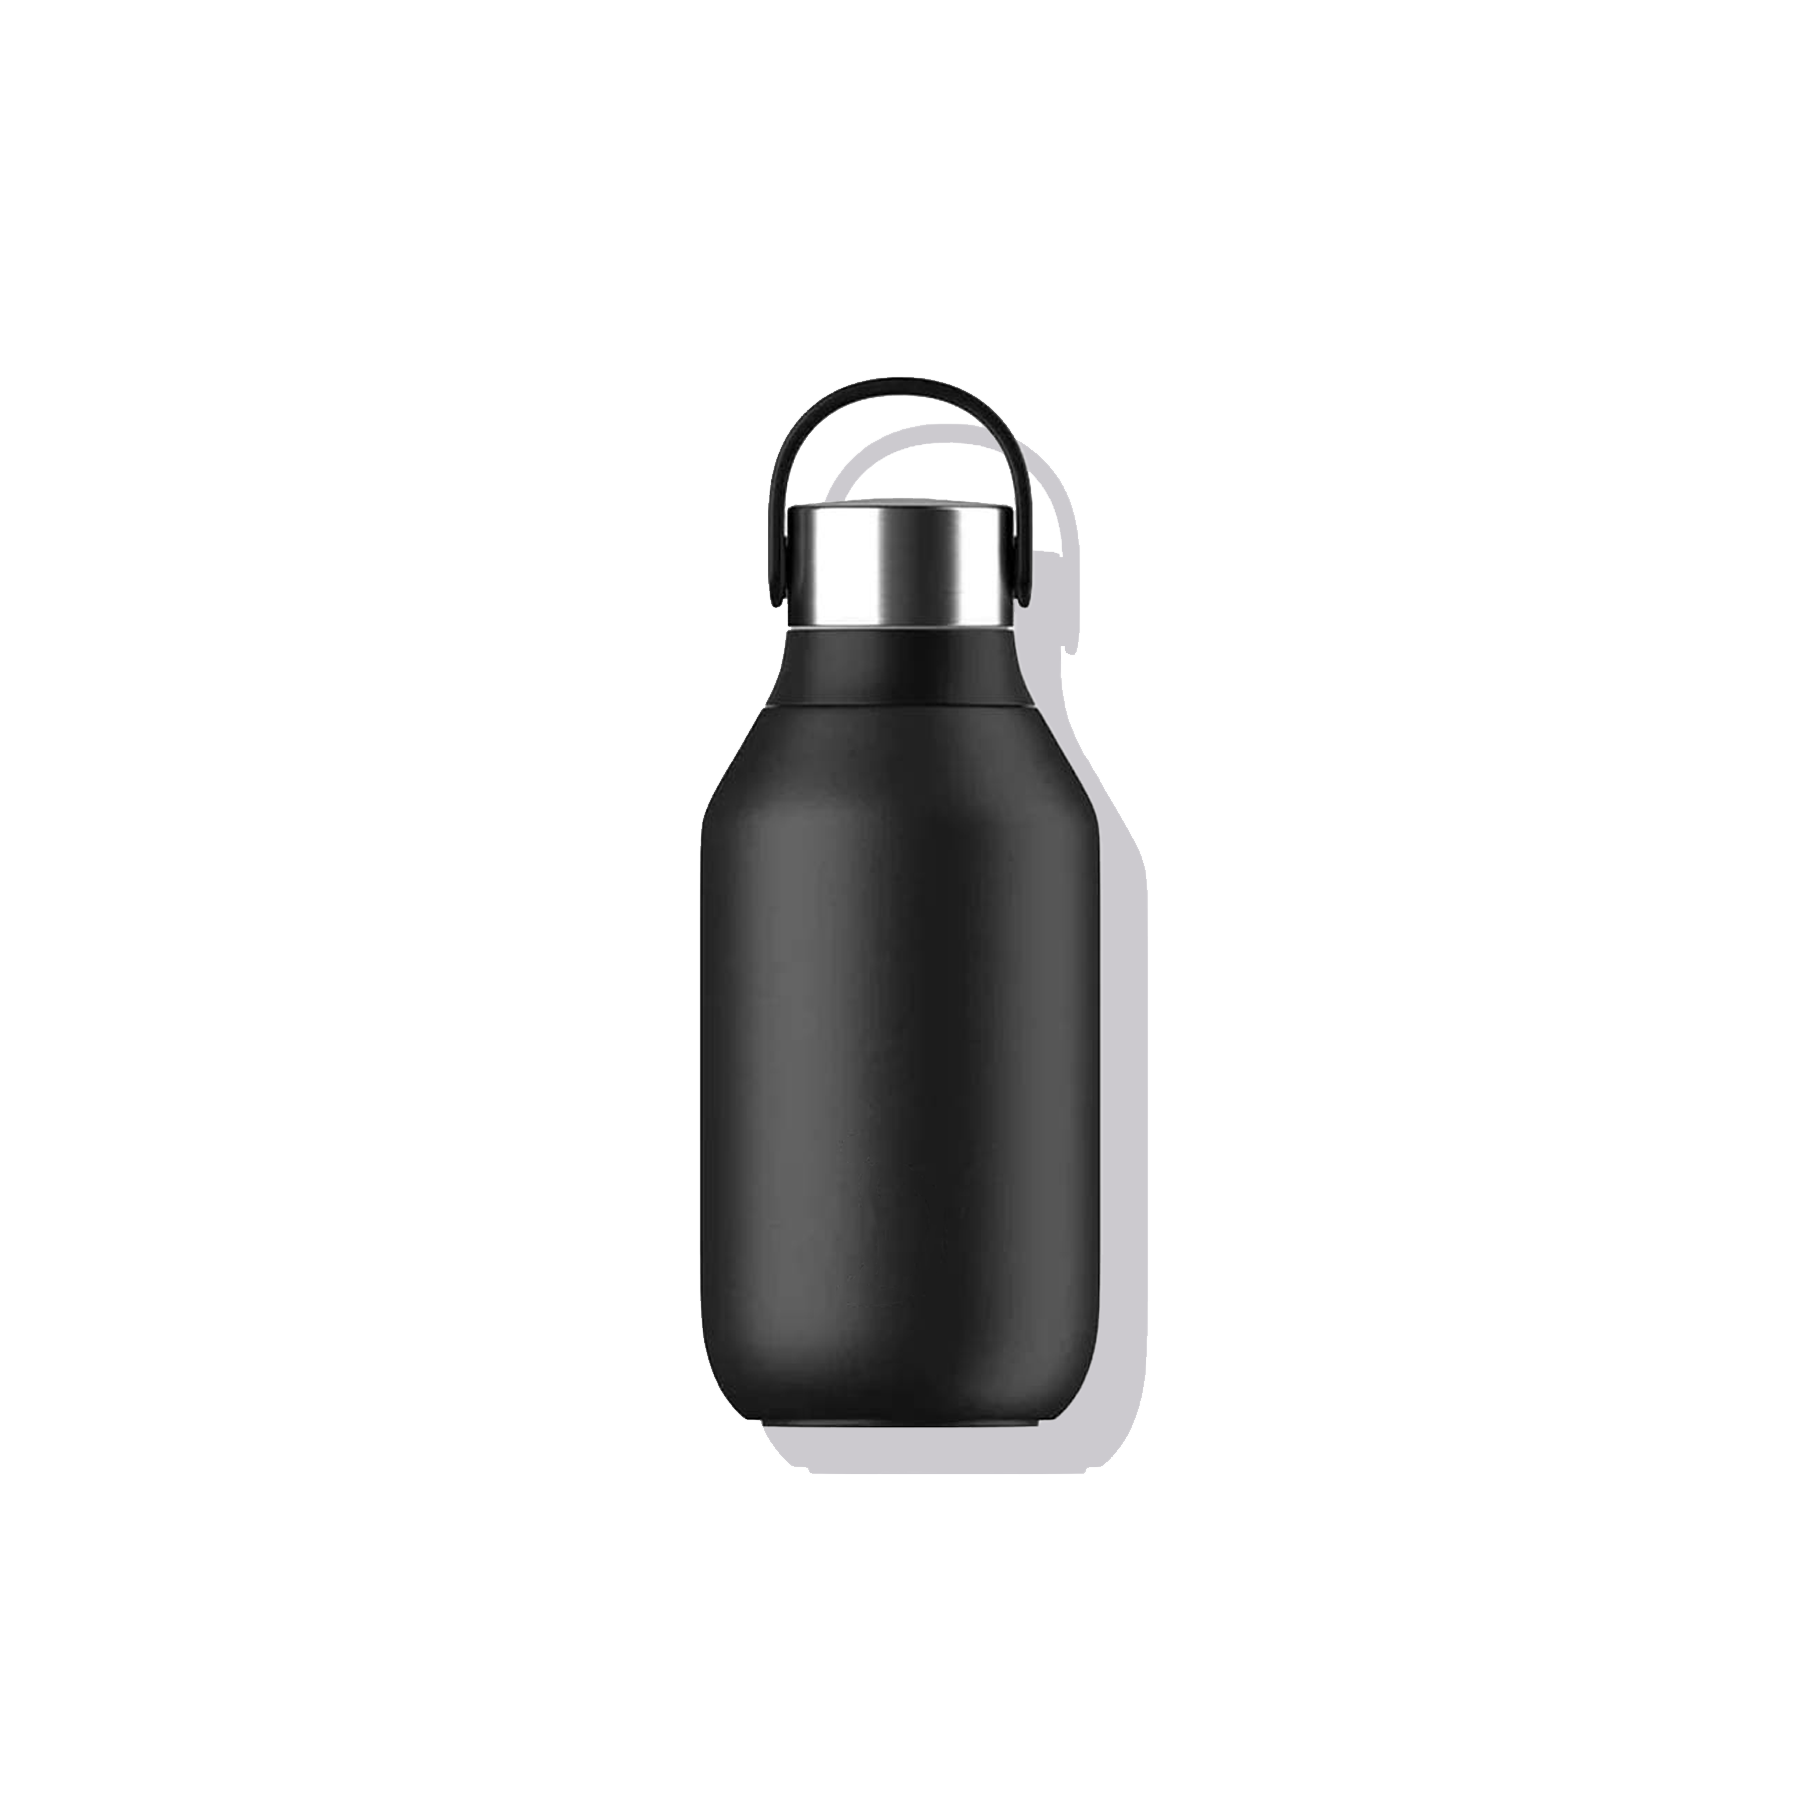 Product_Chillys_Black_350ml-blank.png